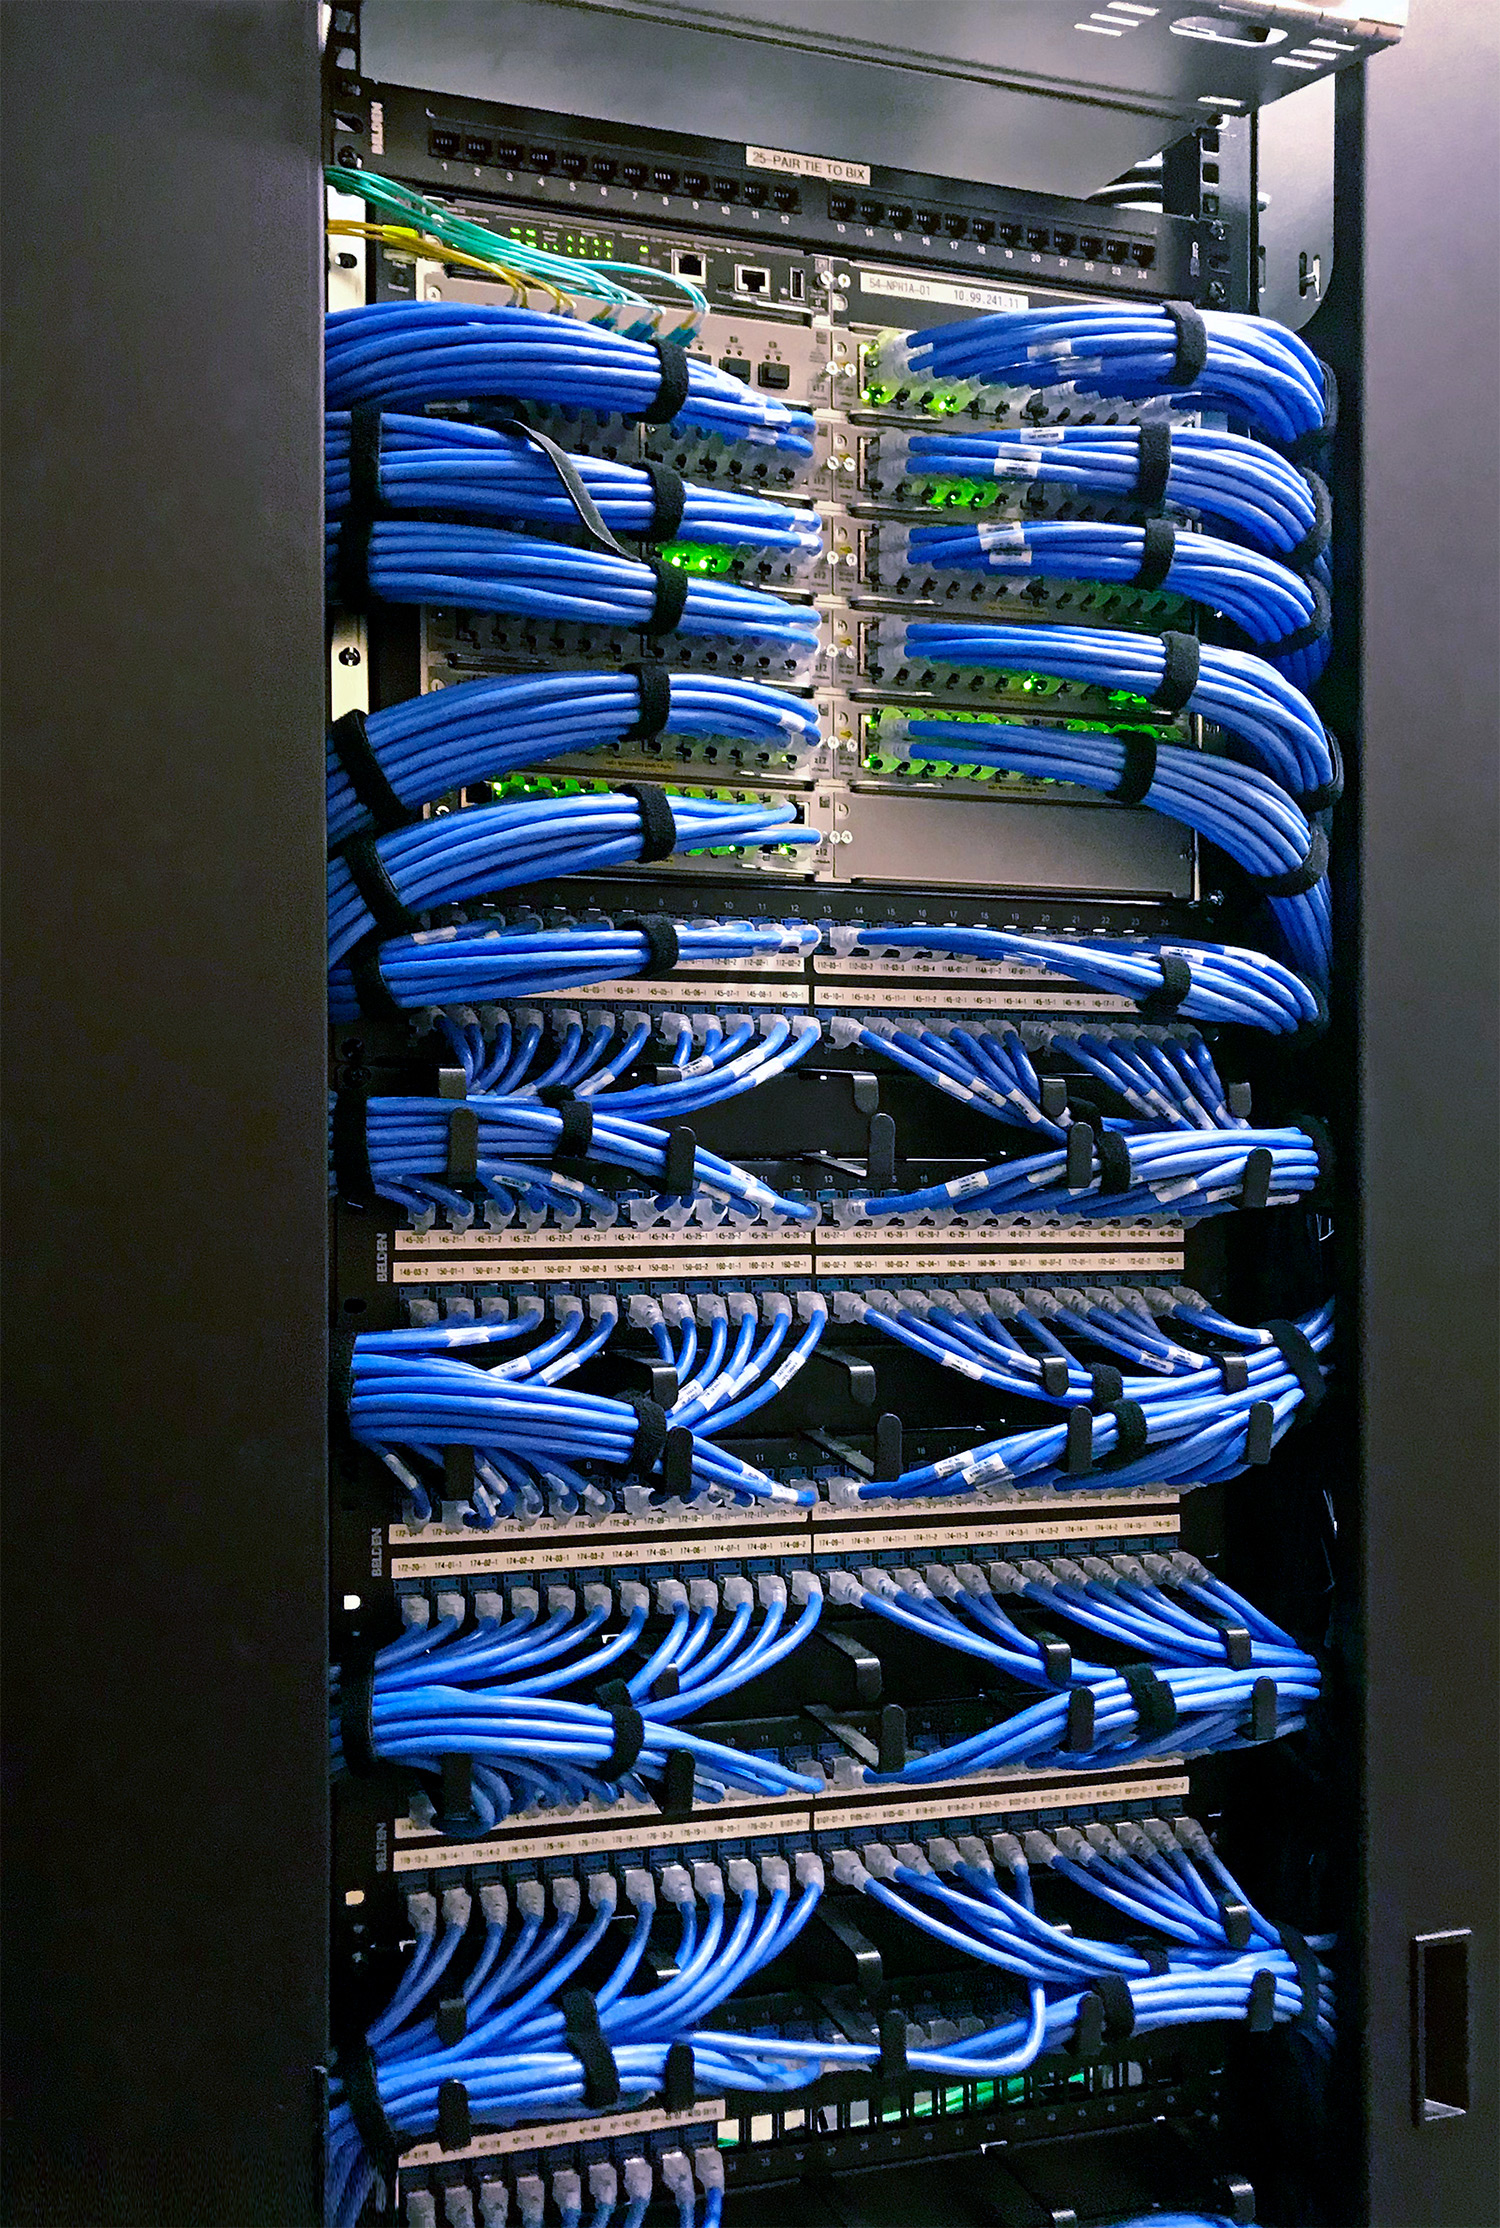 Cabling of the equipment racks, such as this network rack that includes the Extron NAV Pro AVoIP system components, is dressed according to AV industry best practices.